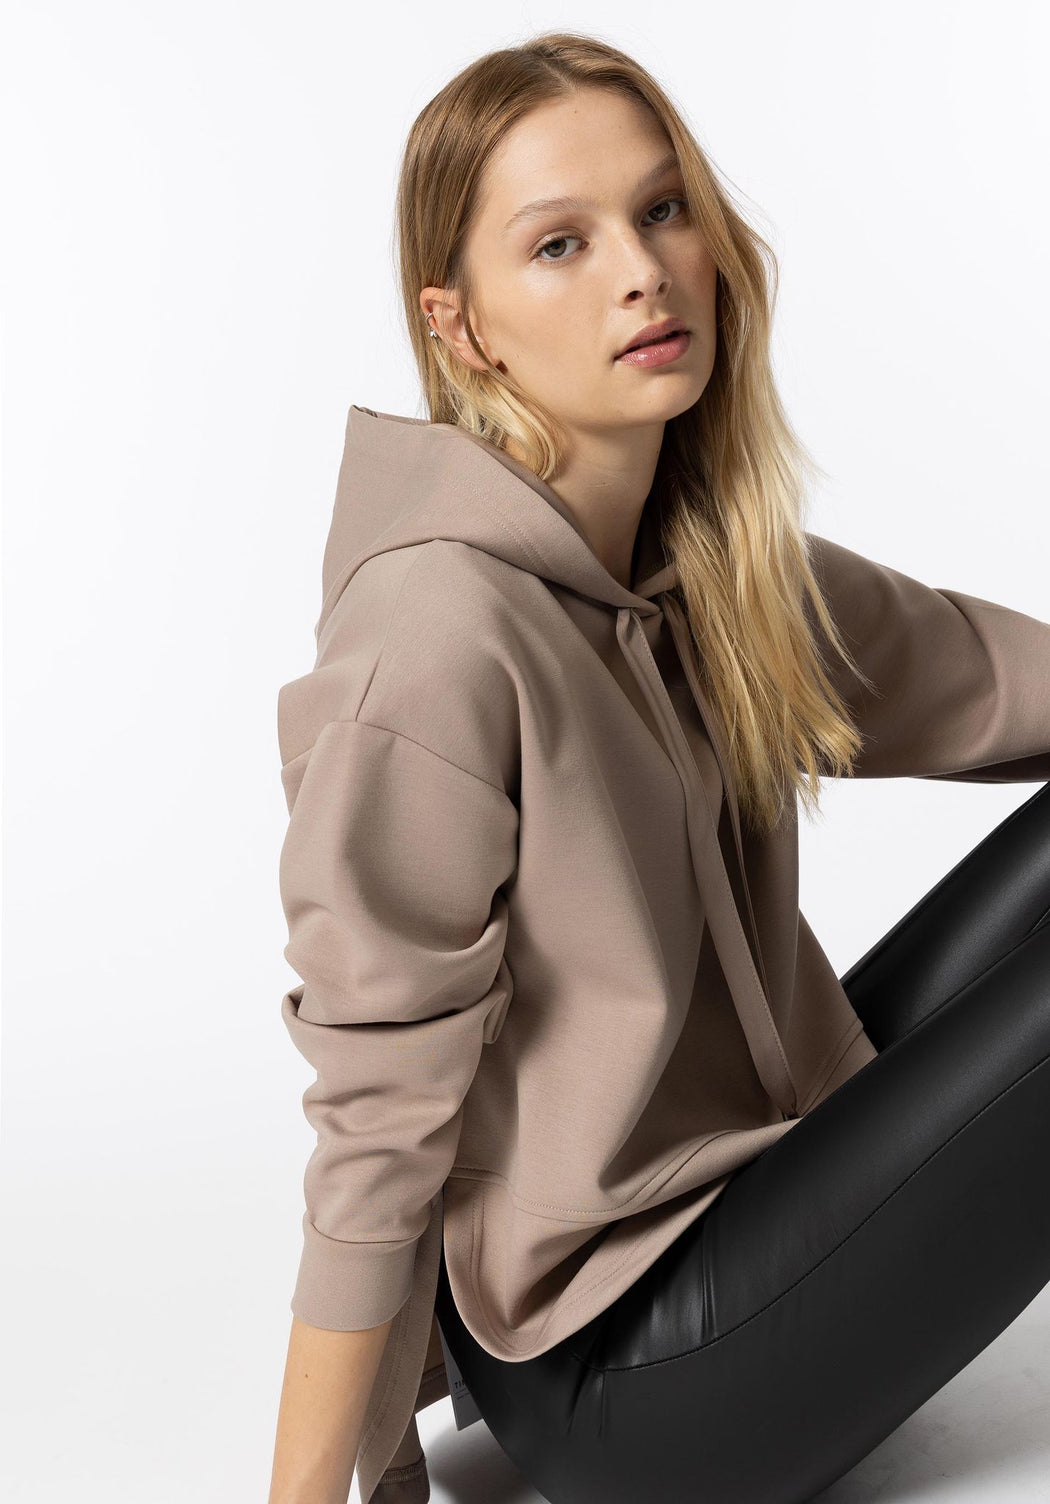 Caly taupe hoody